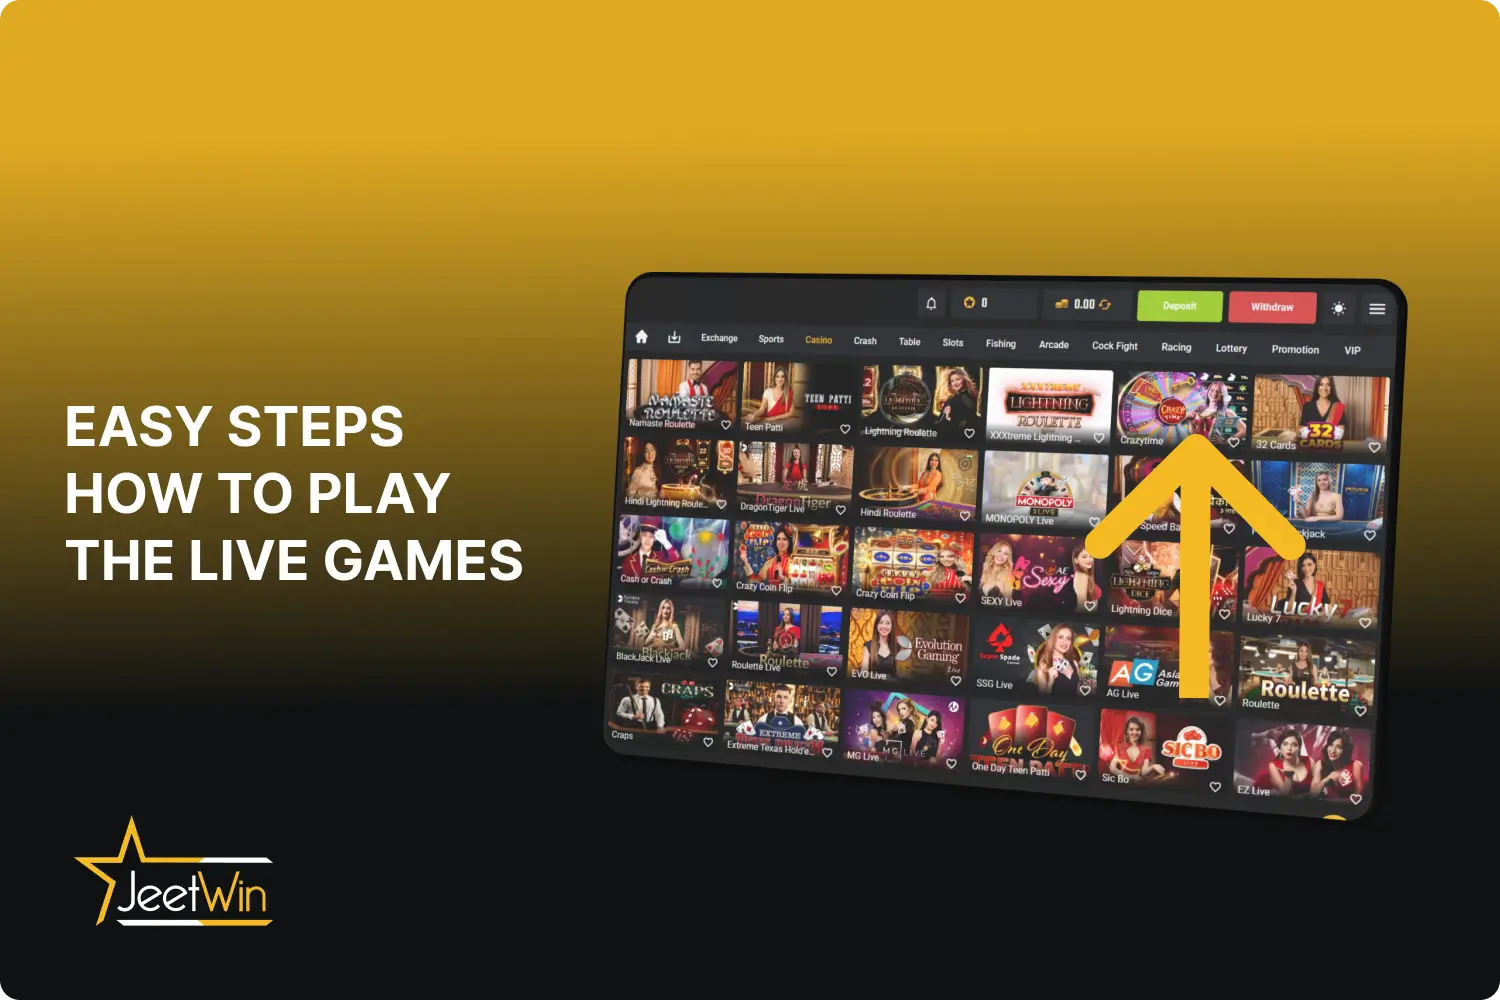 To start playing the live games at Jeetwin Casino users from India need to follow a few simple steps